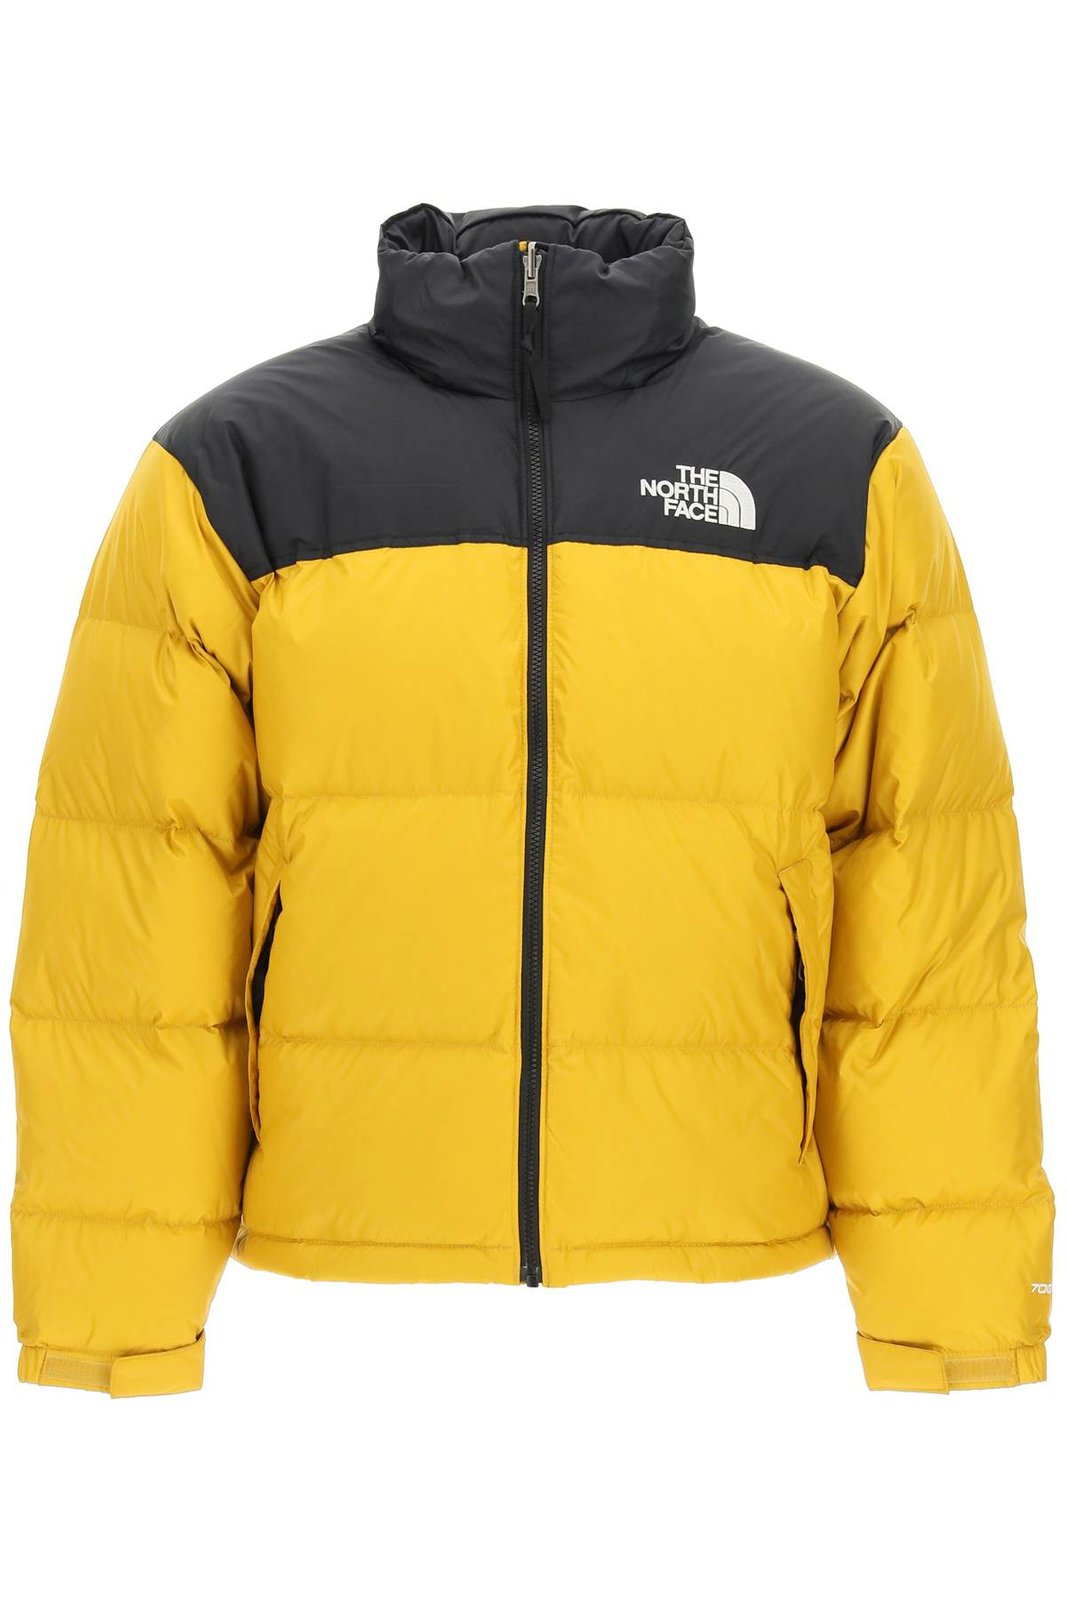 THE NORTH FACE Yellow & Black Down 1996 Retro Nuptse Puffer Jacket- A2 ...